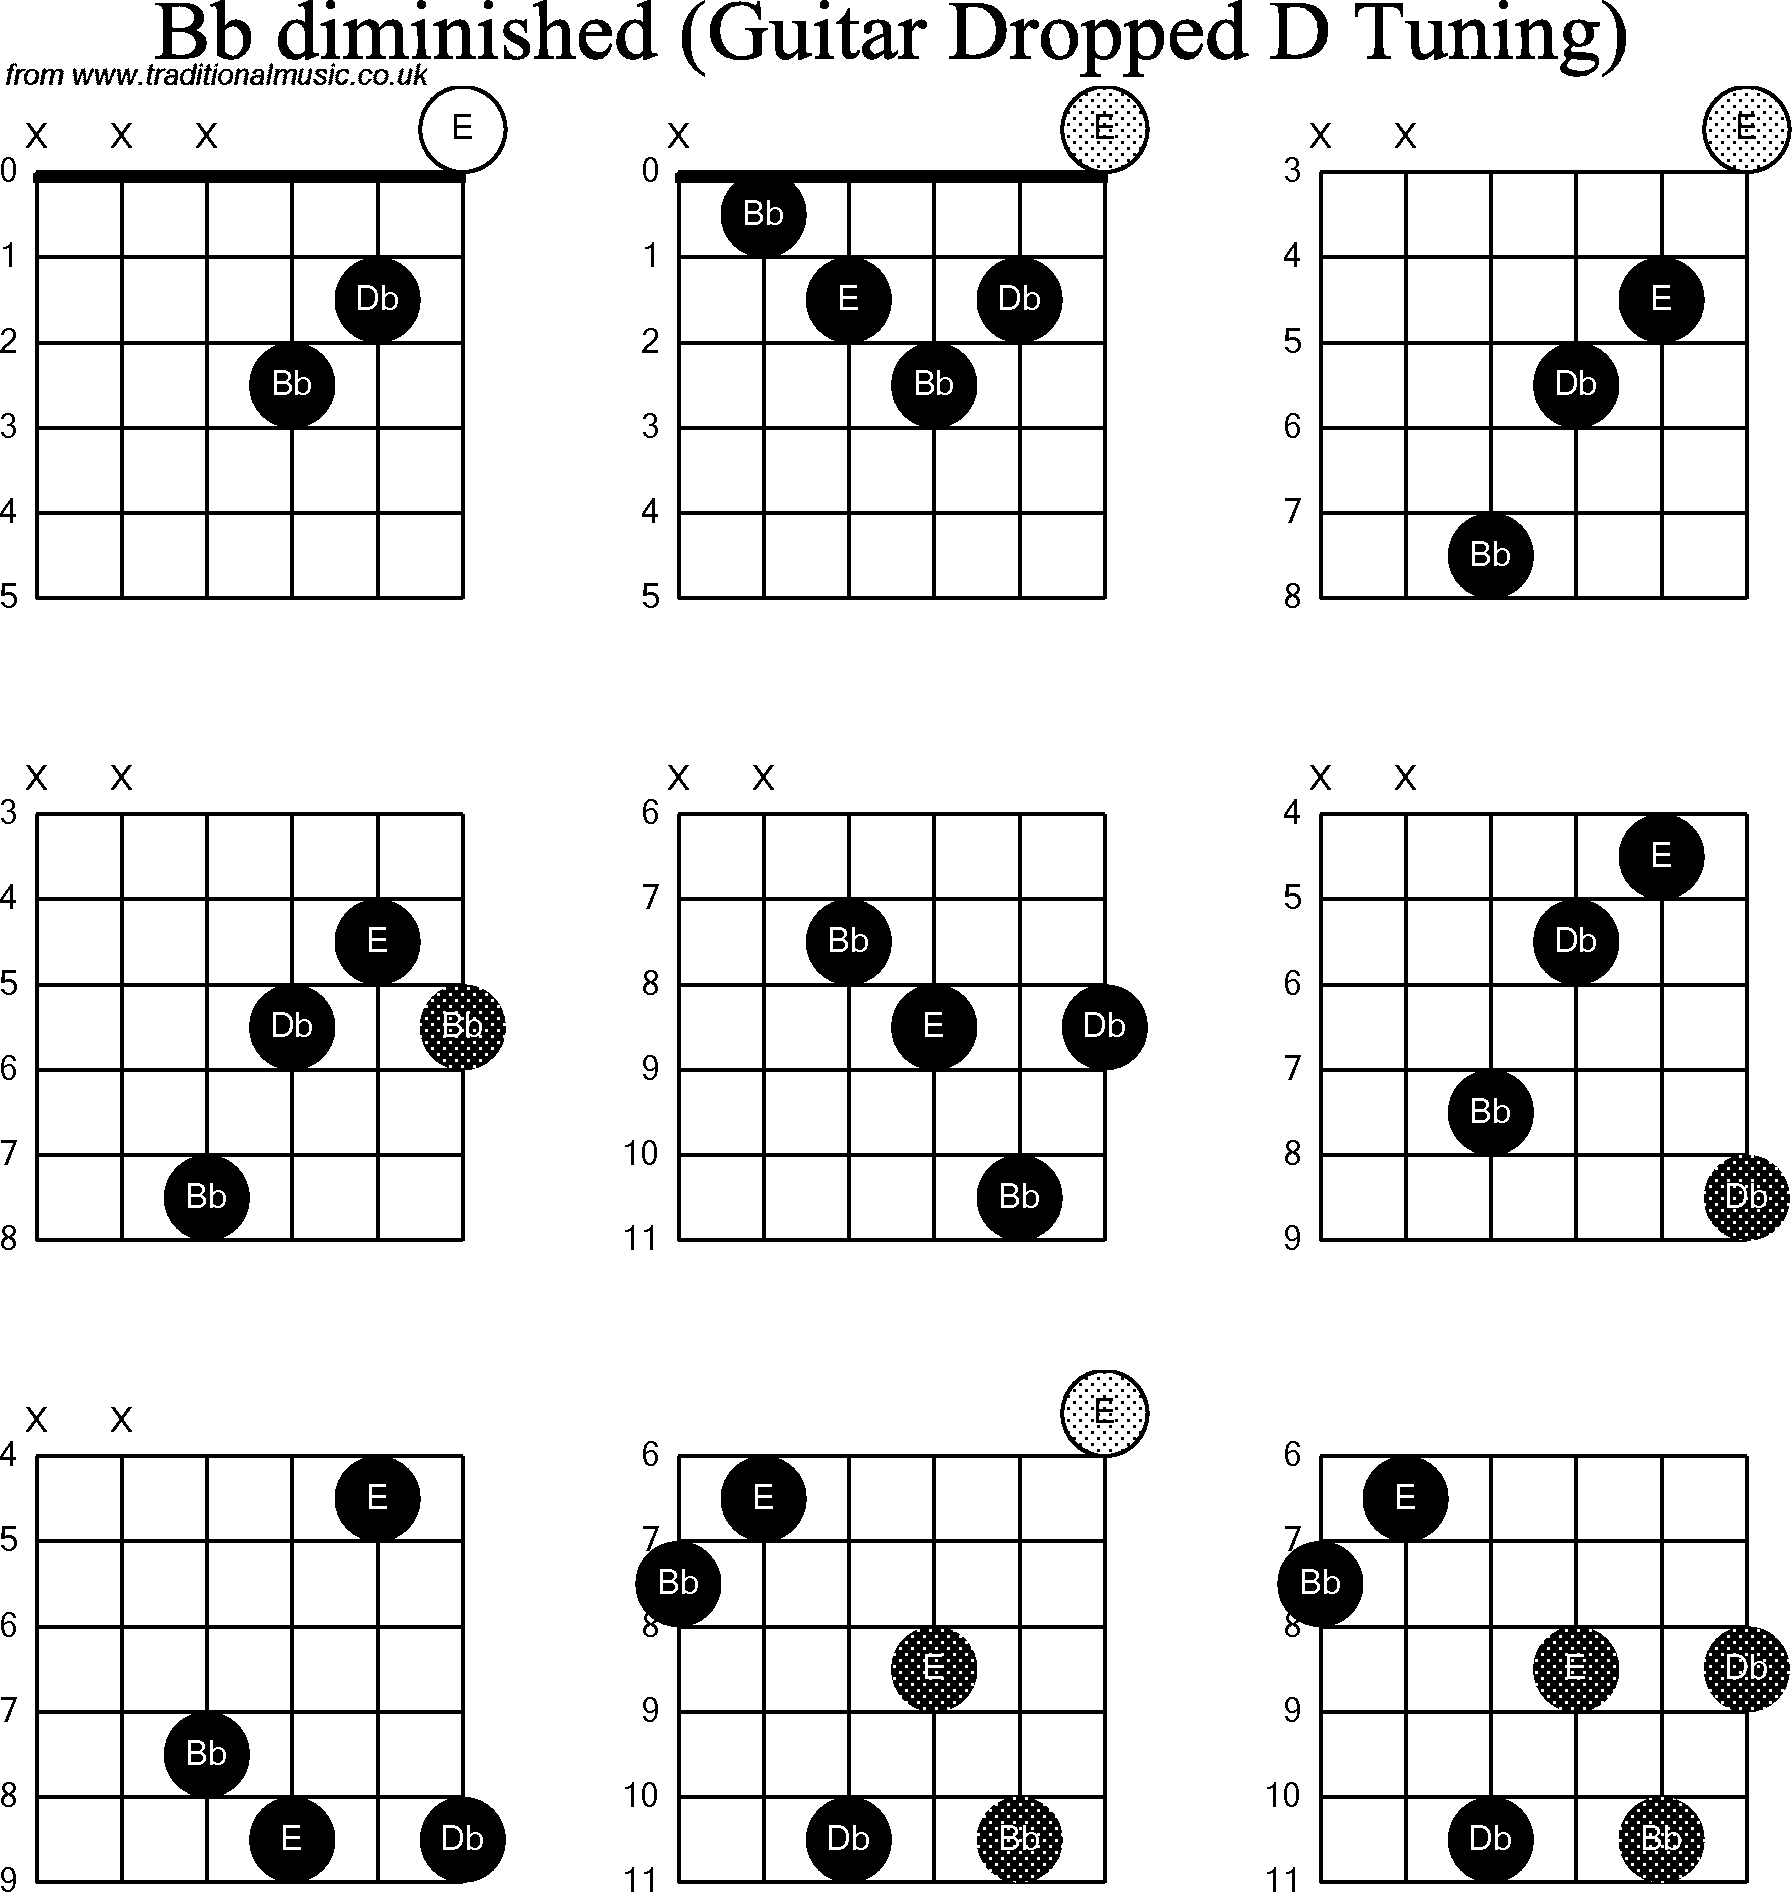 Chord diagrams for dropped D Guitar(DADGBE), Bb Diminished